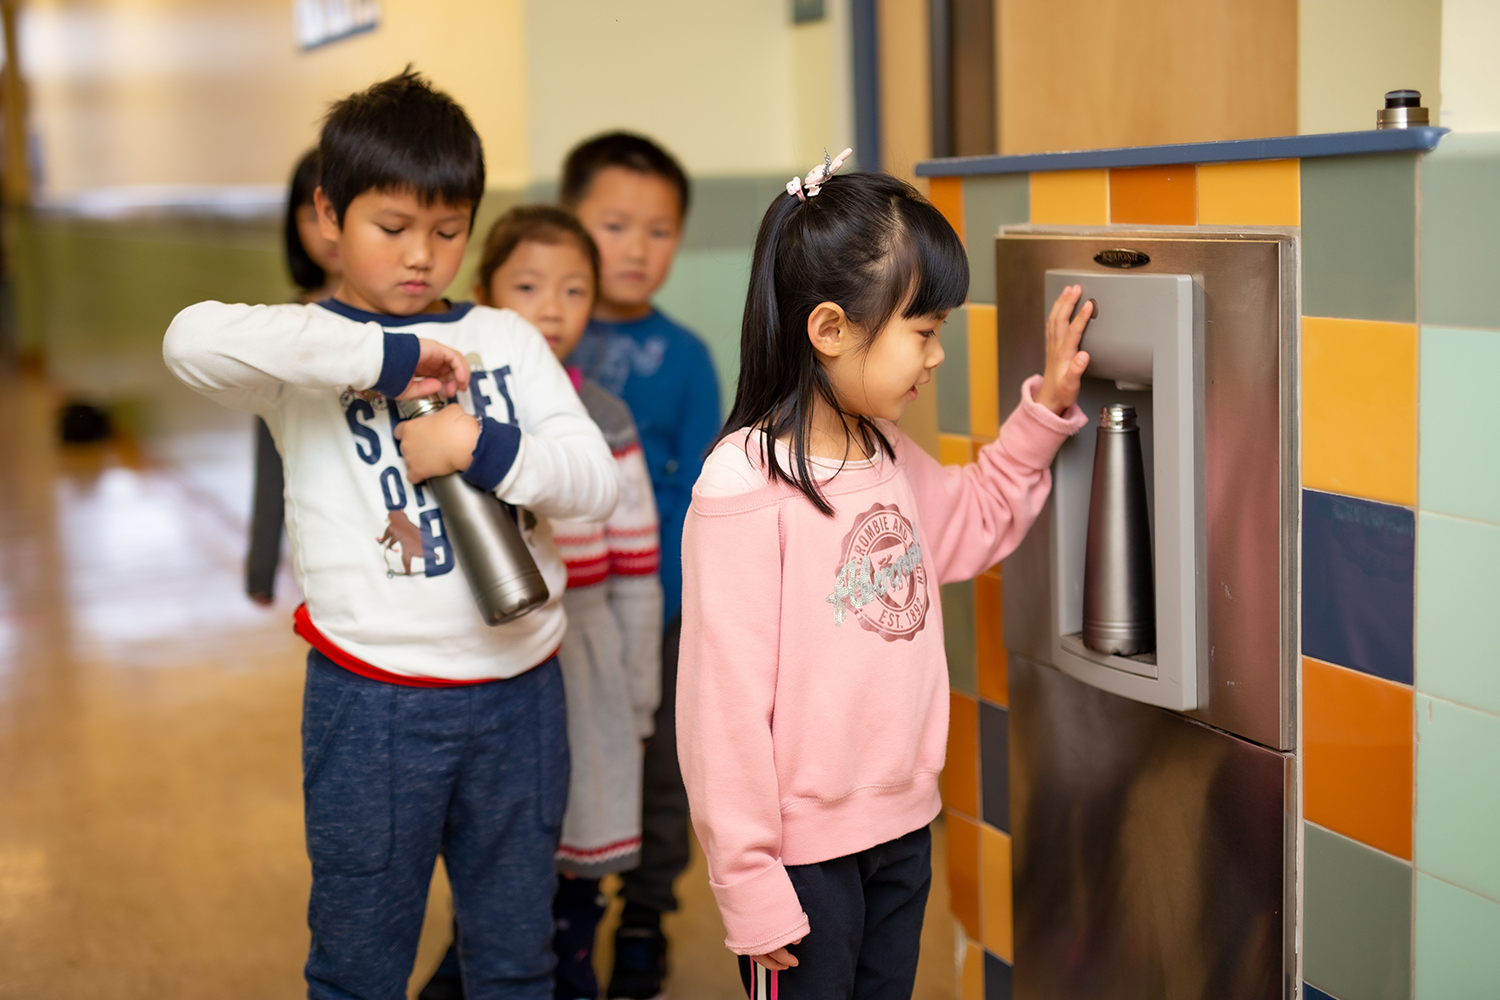 Kids getting in line to get to the water dispenser